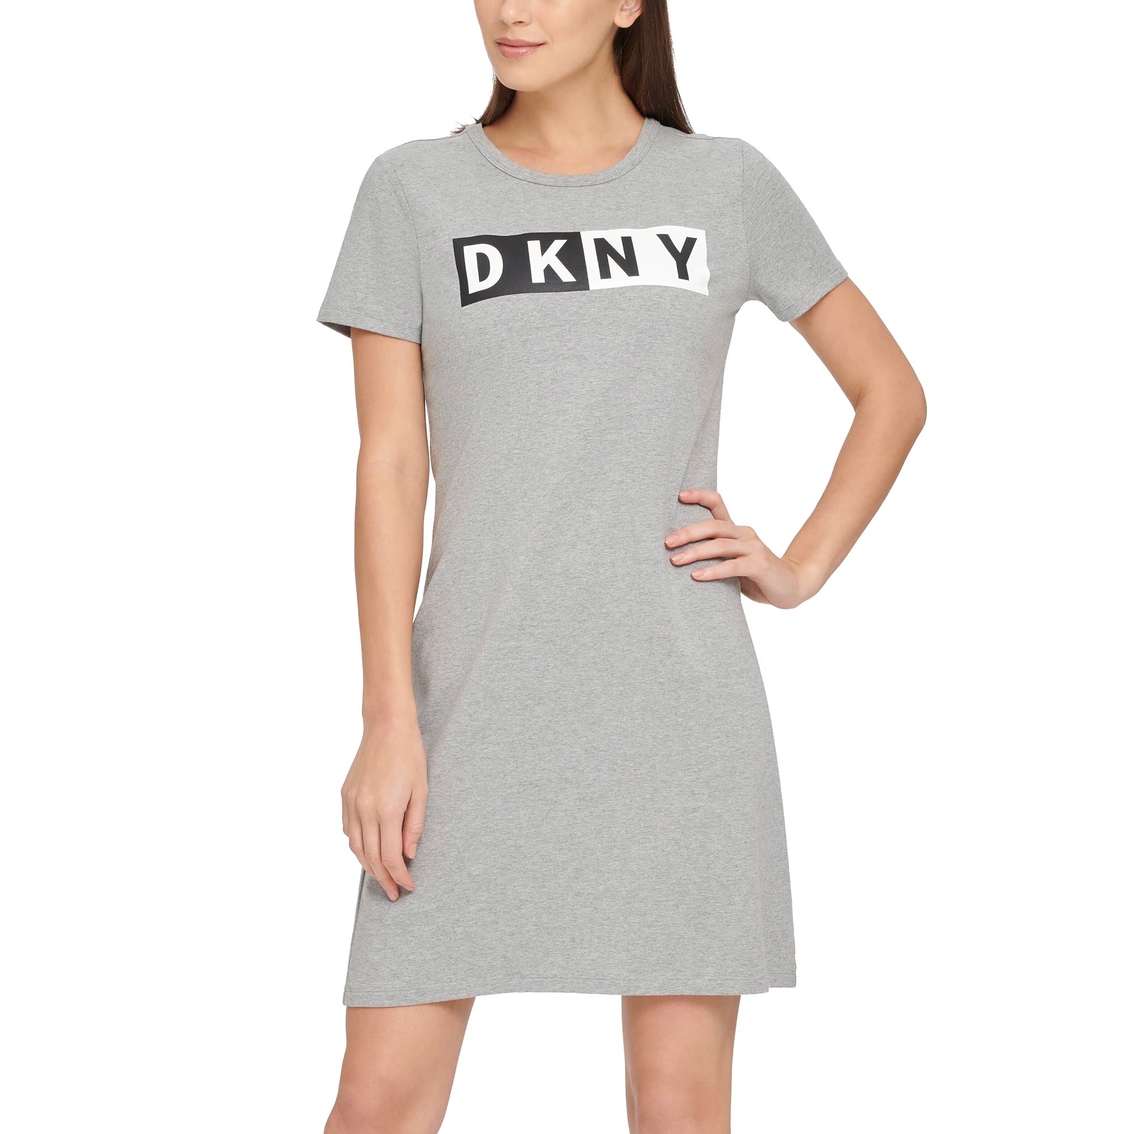 Dkny Sport Two-tone Logo Tee Dress, Dresses, Clothing & Accessories